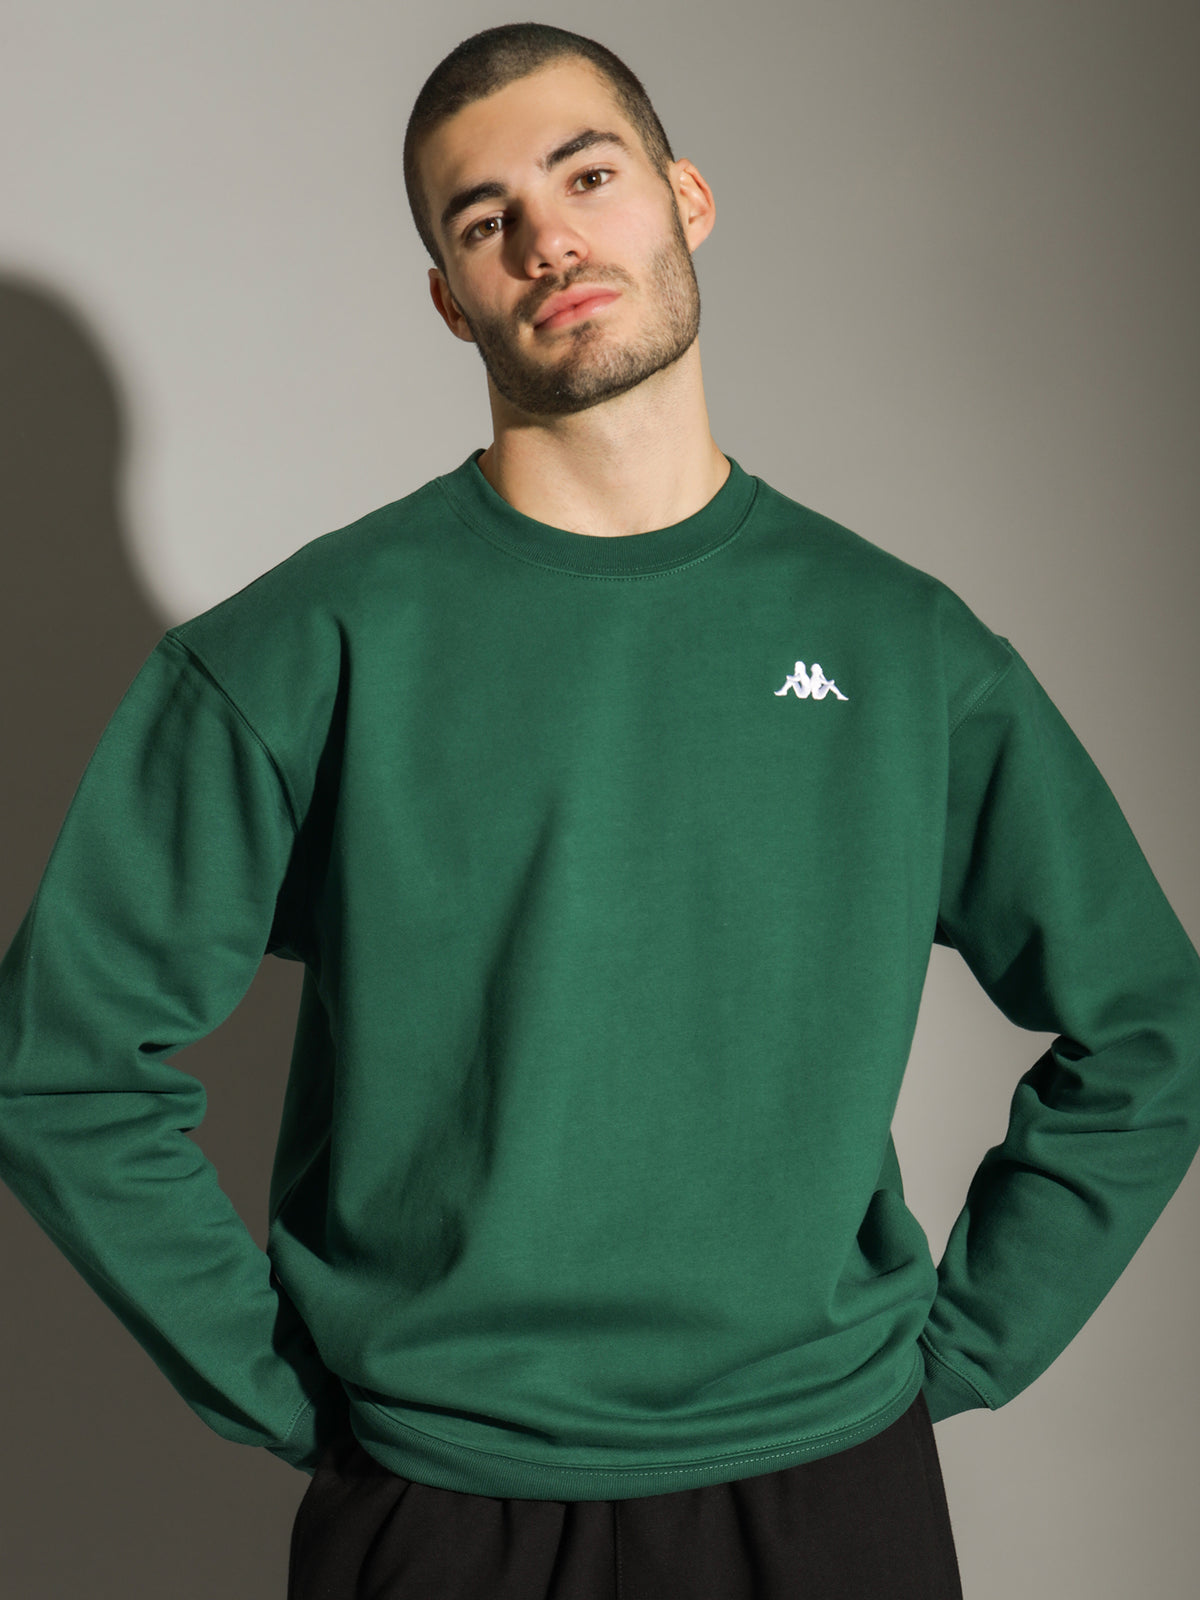 Authentic Steve Jumper in Green Posy